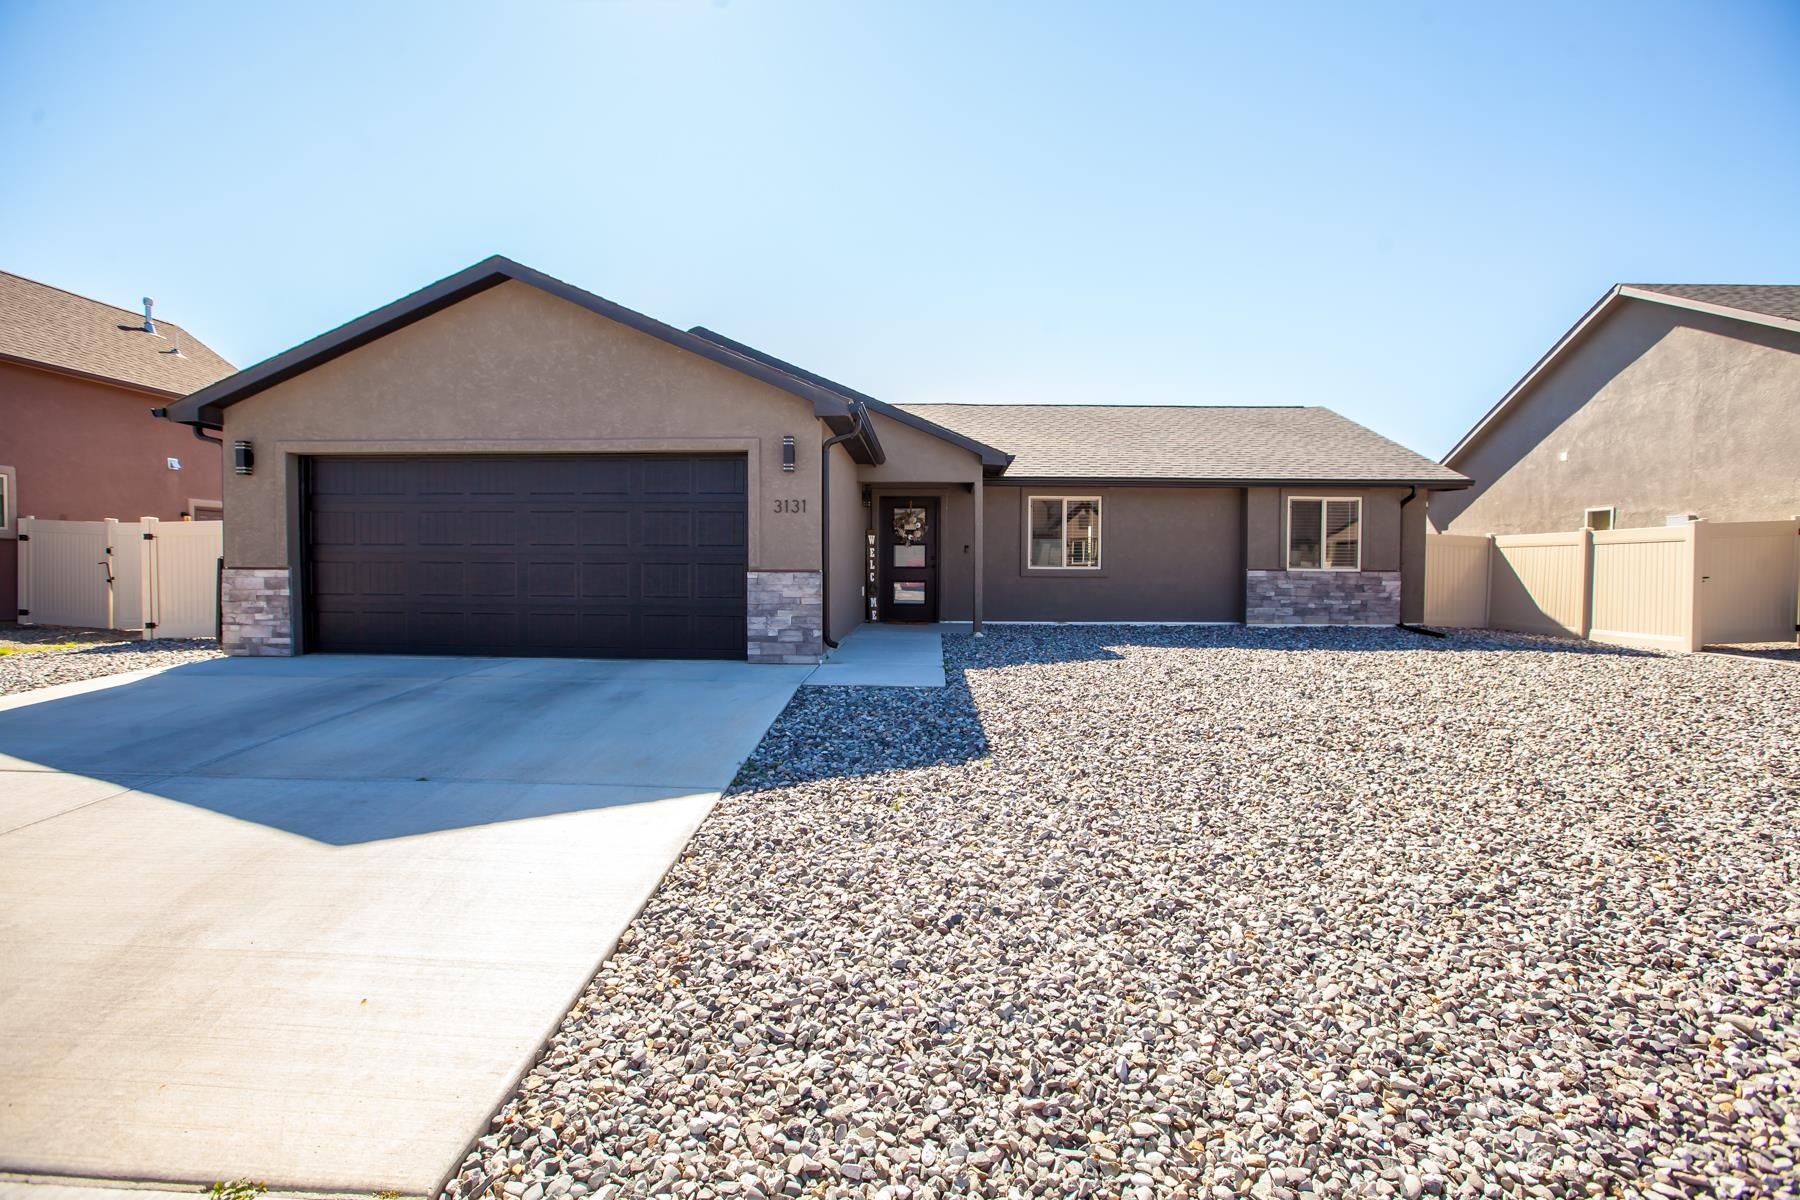 This beautiful home is ready for new owners.  The home features 3 bedrooms and 2 bathrooms with a bright open floor plan.  Laminate flooring through the living room, kitchen, and dining room, tile bathroom floors and carpet in the bedrooms.  Walk in pantry with plenty of storage.